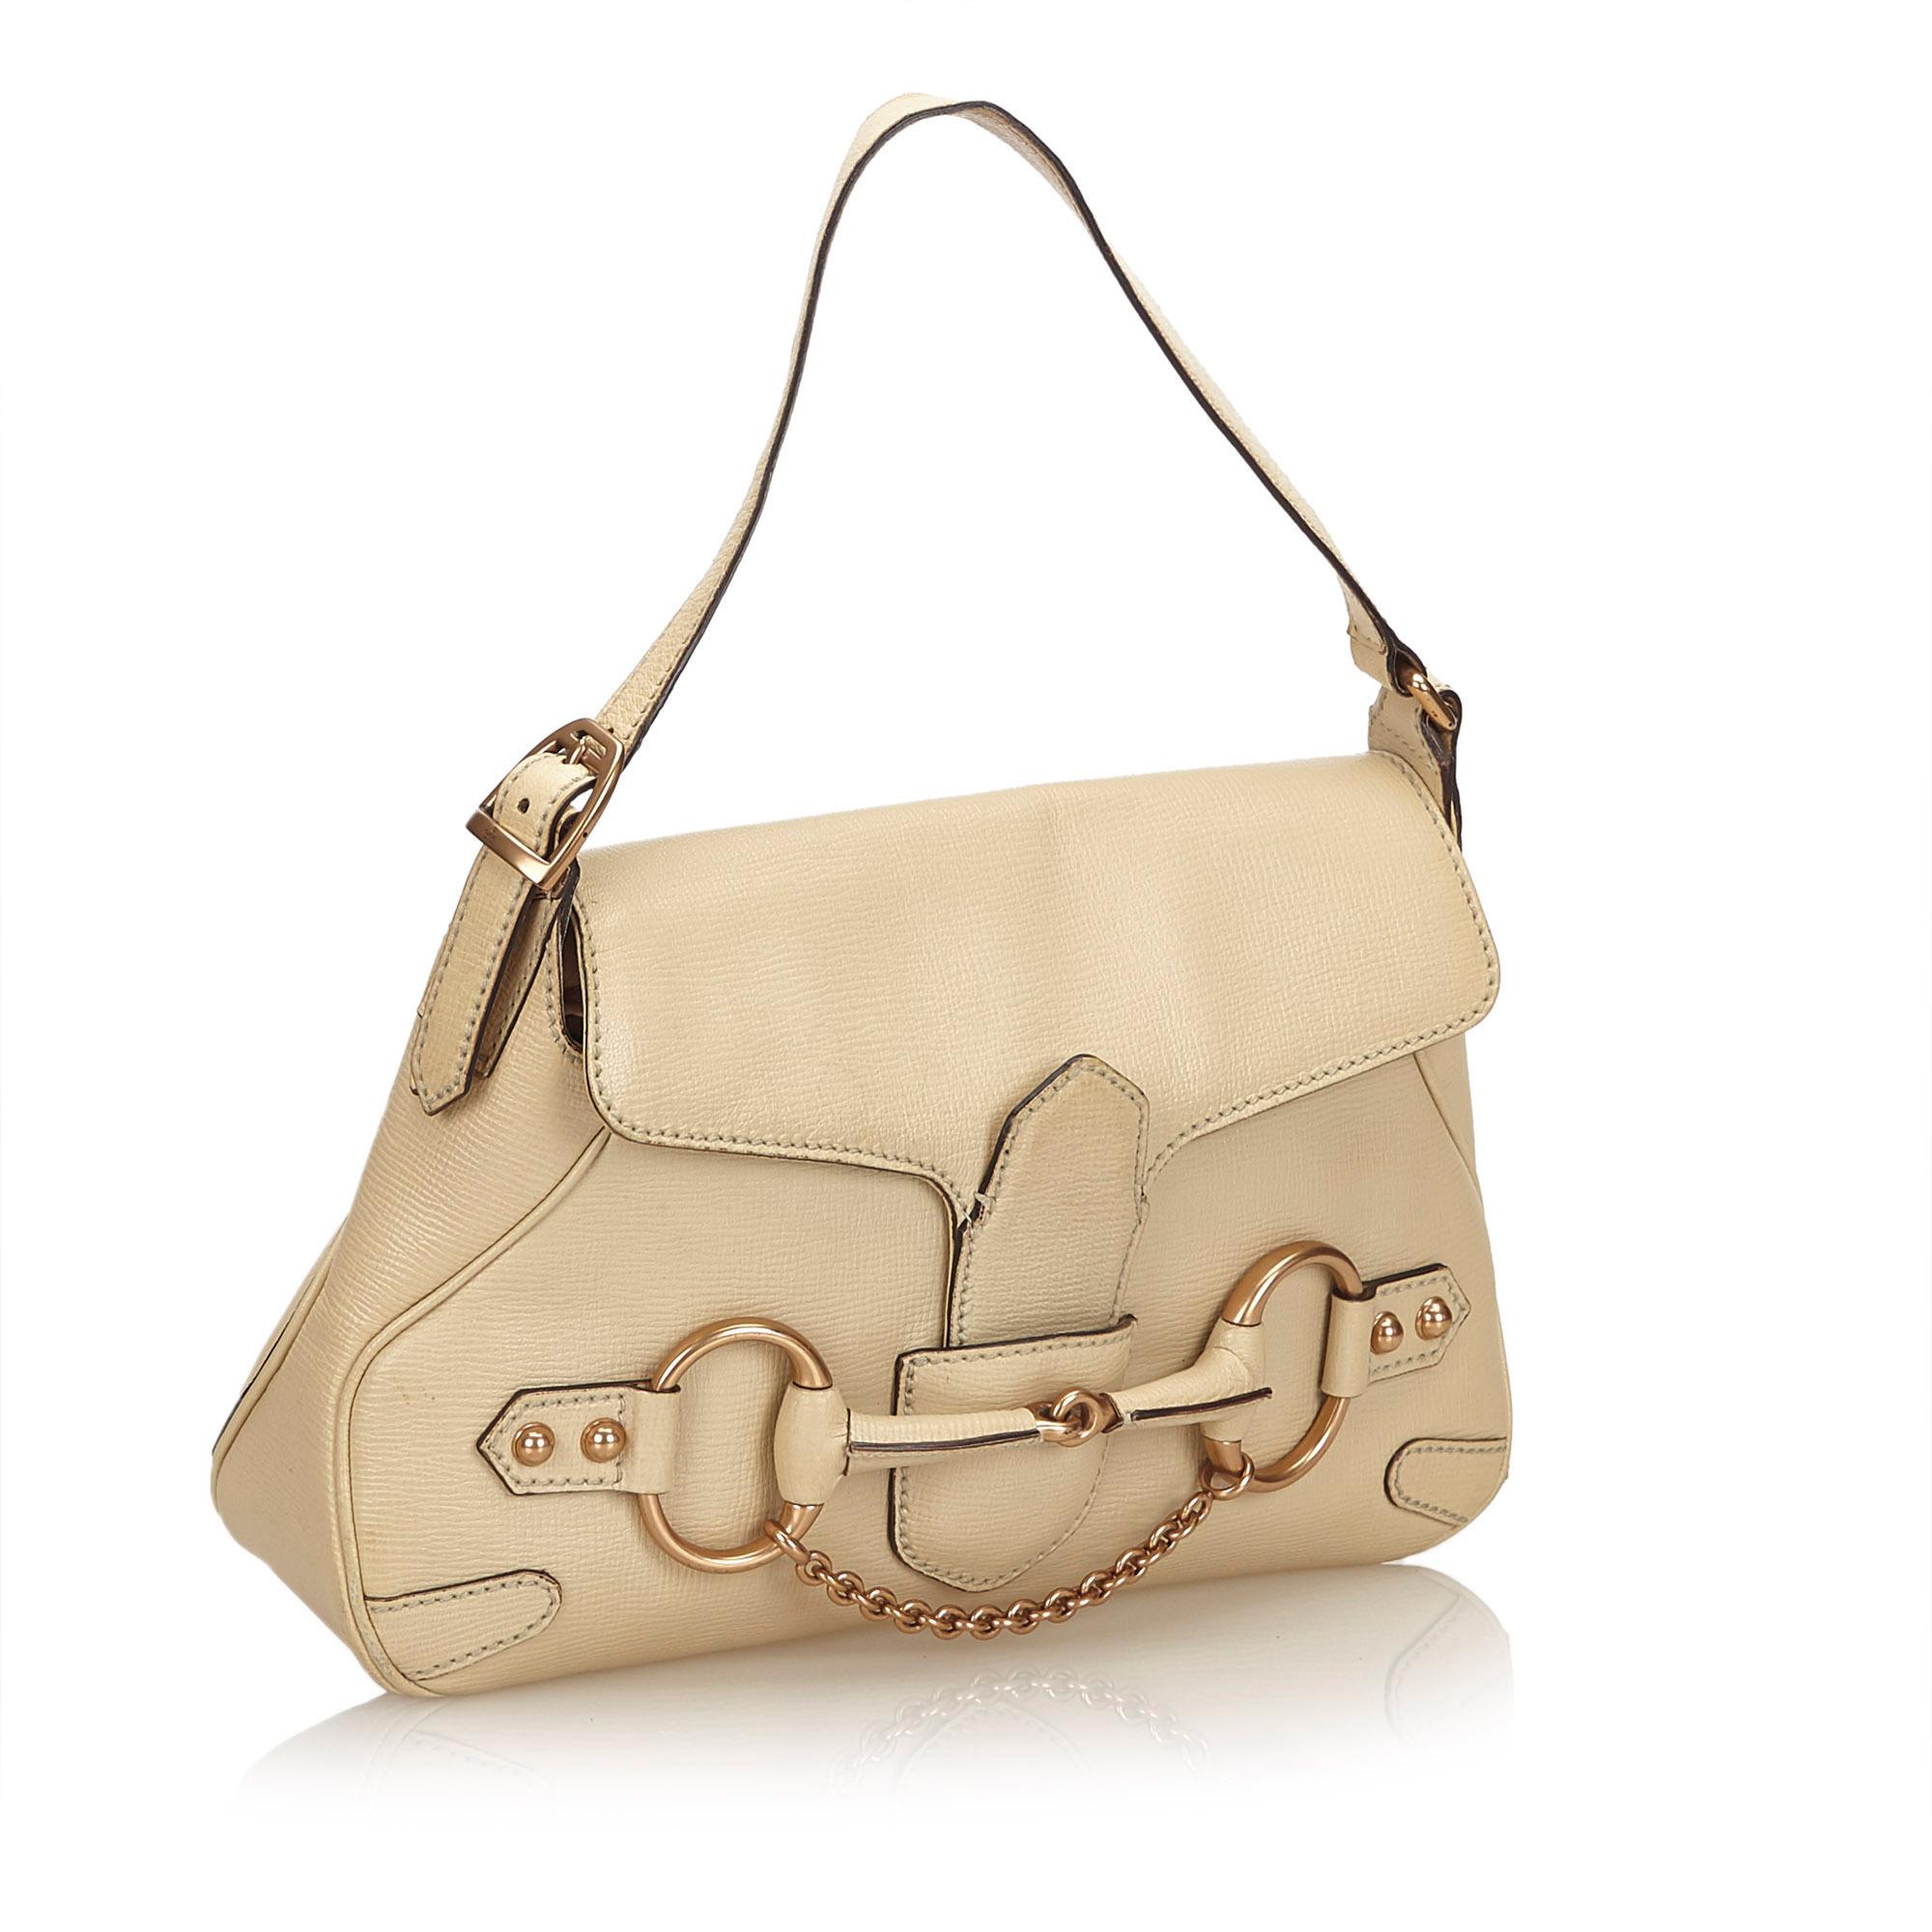 This handbag features a leather body, flat strap, top flap, horsebit and chain detail and interior zip pocket. It carries as B condition rating.

Inclusions: 
This item does not come with inclusions.

Dimensions:
Length: 20.00 cm
Width: 33.00